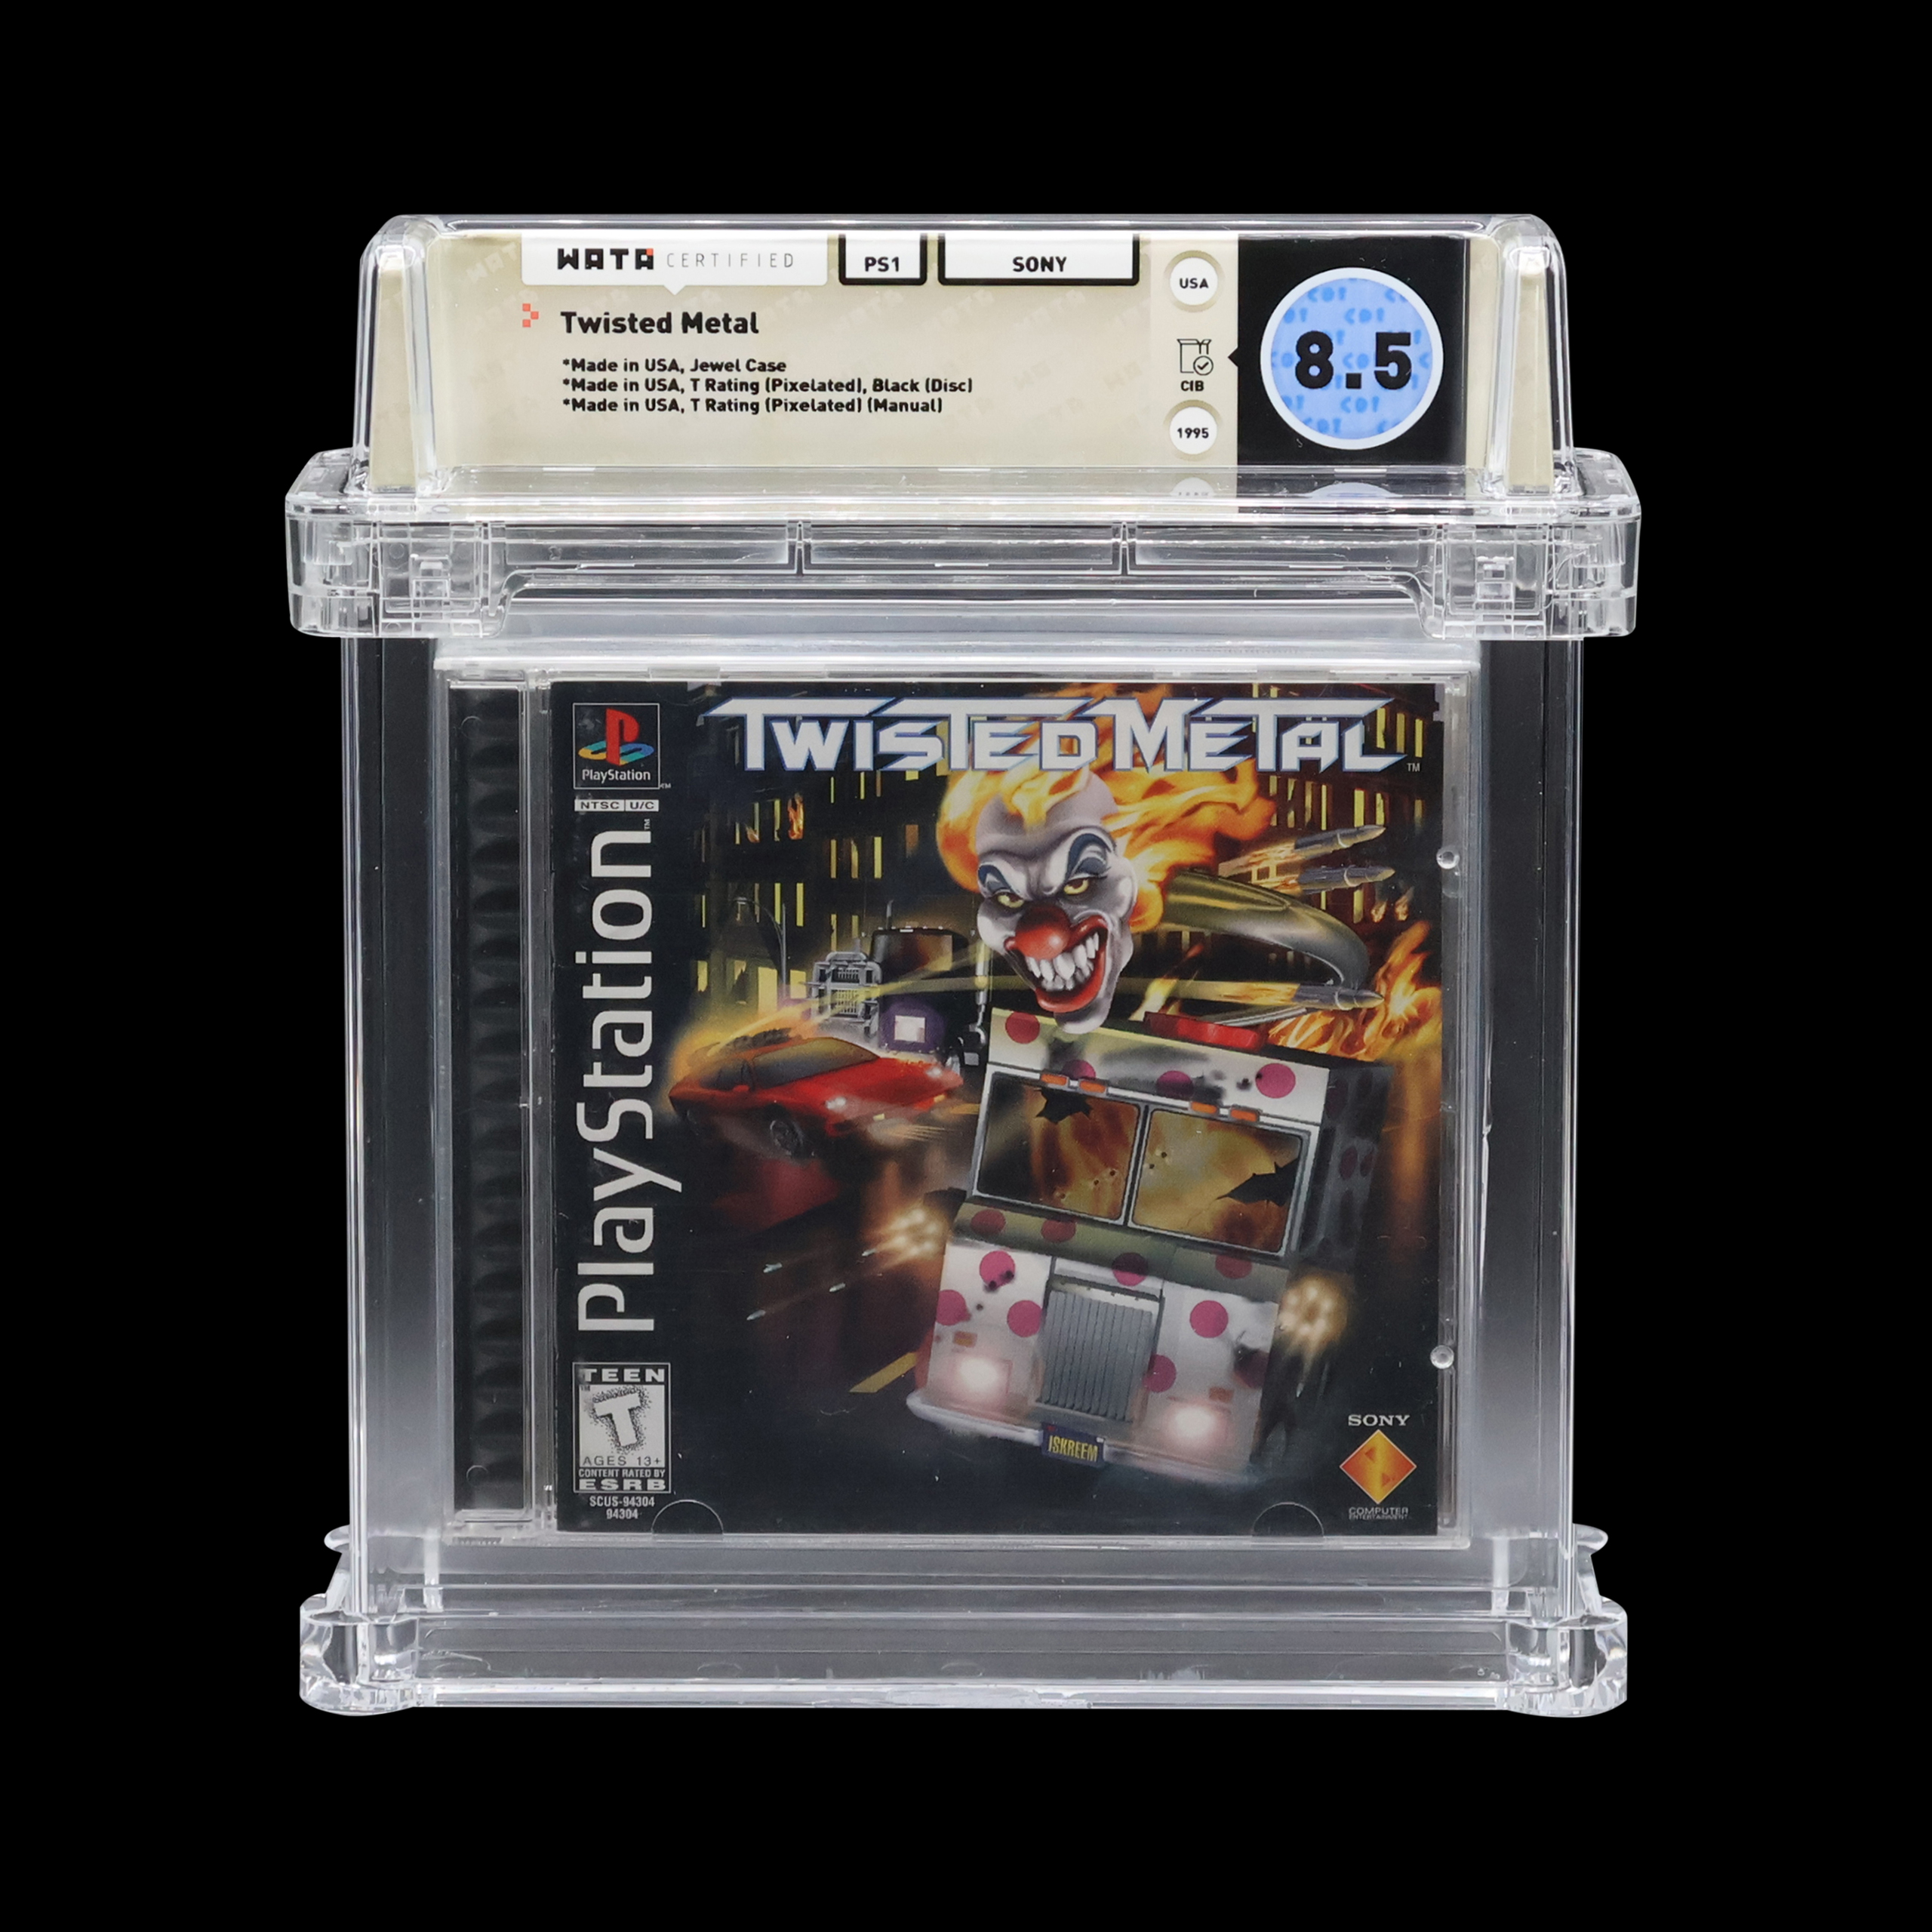 Twisted Metal PlayStation game, WATA-rated 8.5, in protective display case.